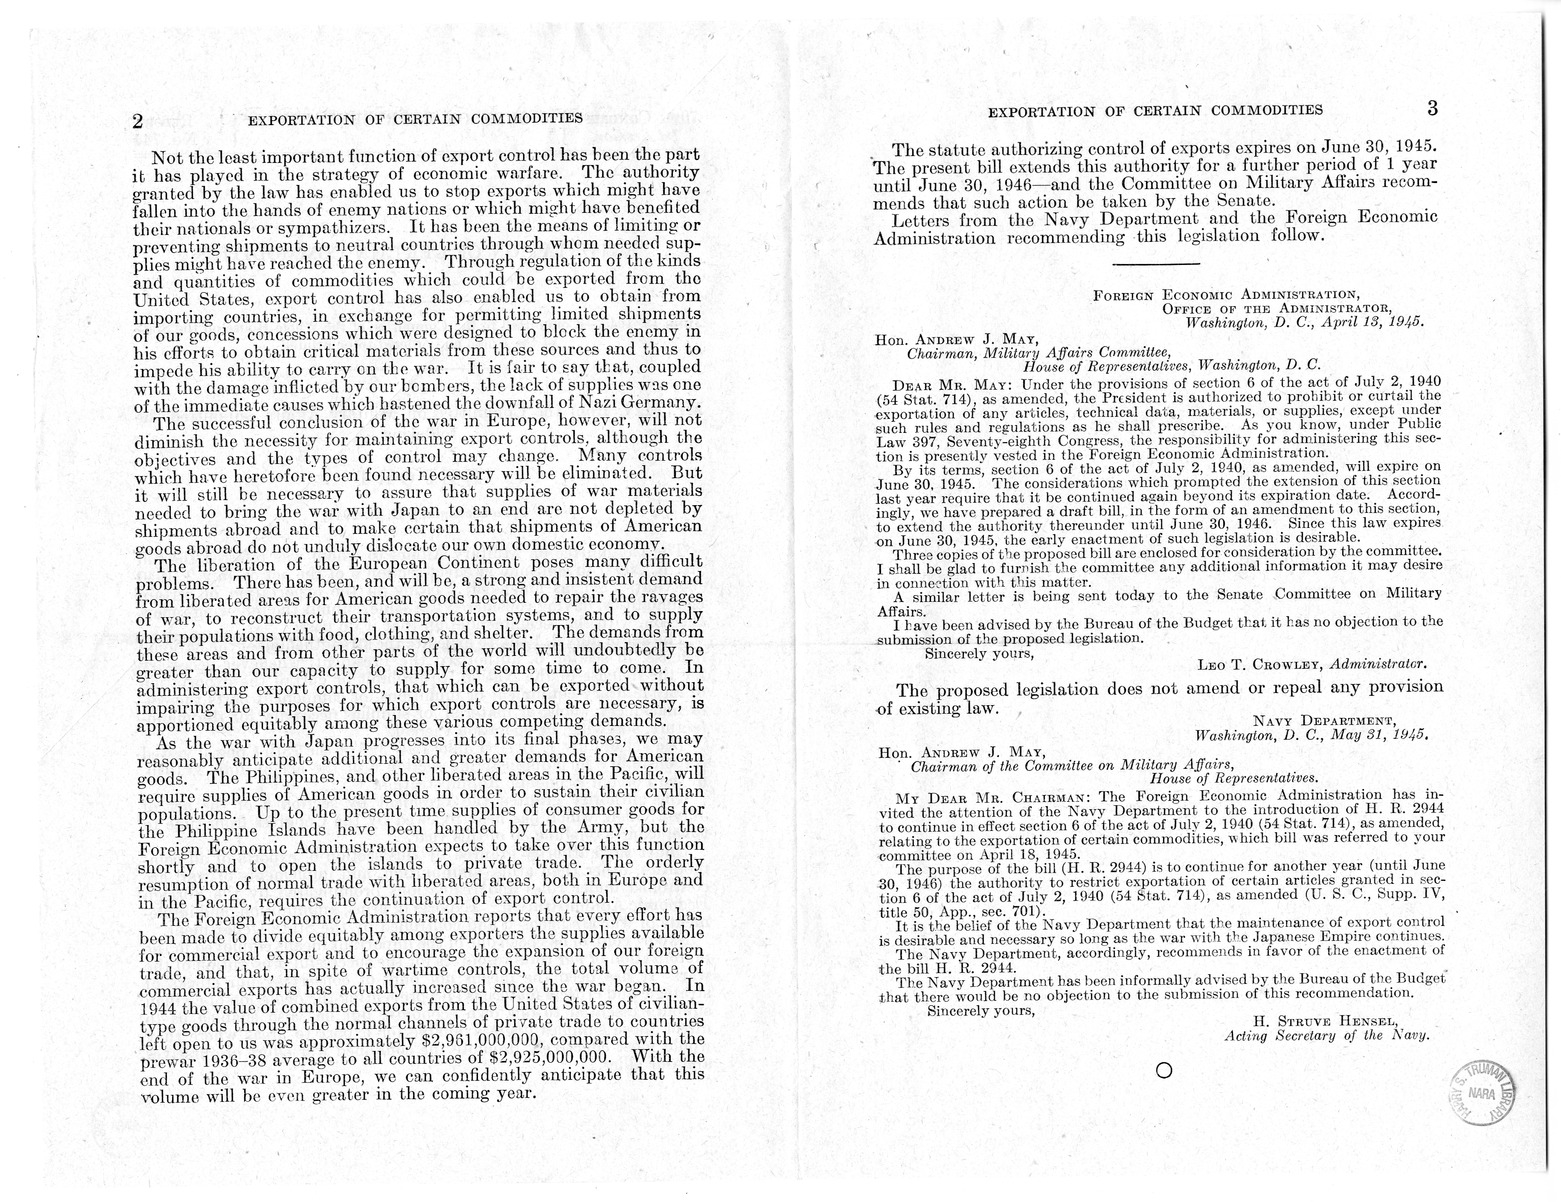 Memorandum from Harold D. Smith to M. C. Latta, H.R. 2944, To Continue in Effect Section 6 of the Act of July 2, 1940 (54 Stat. 714), as Amended, Relating to the Exportation of Certain Commodities, with Attachments